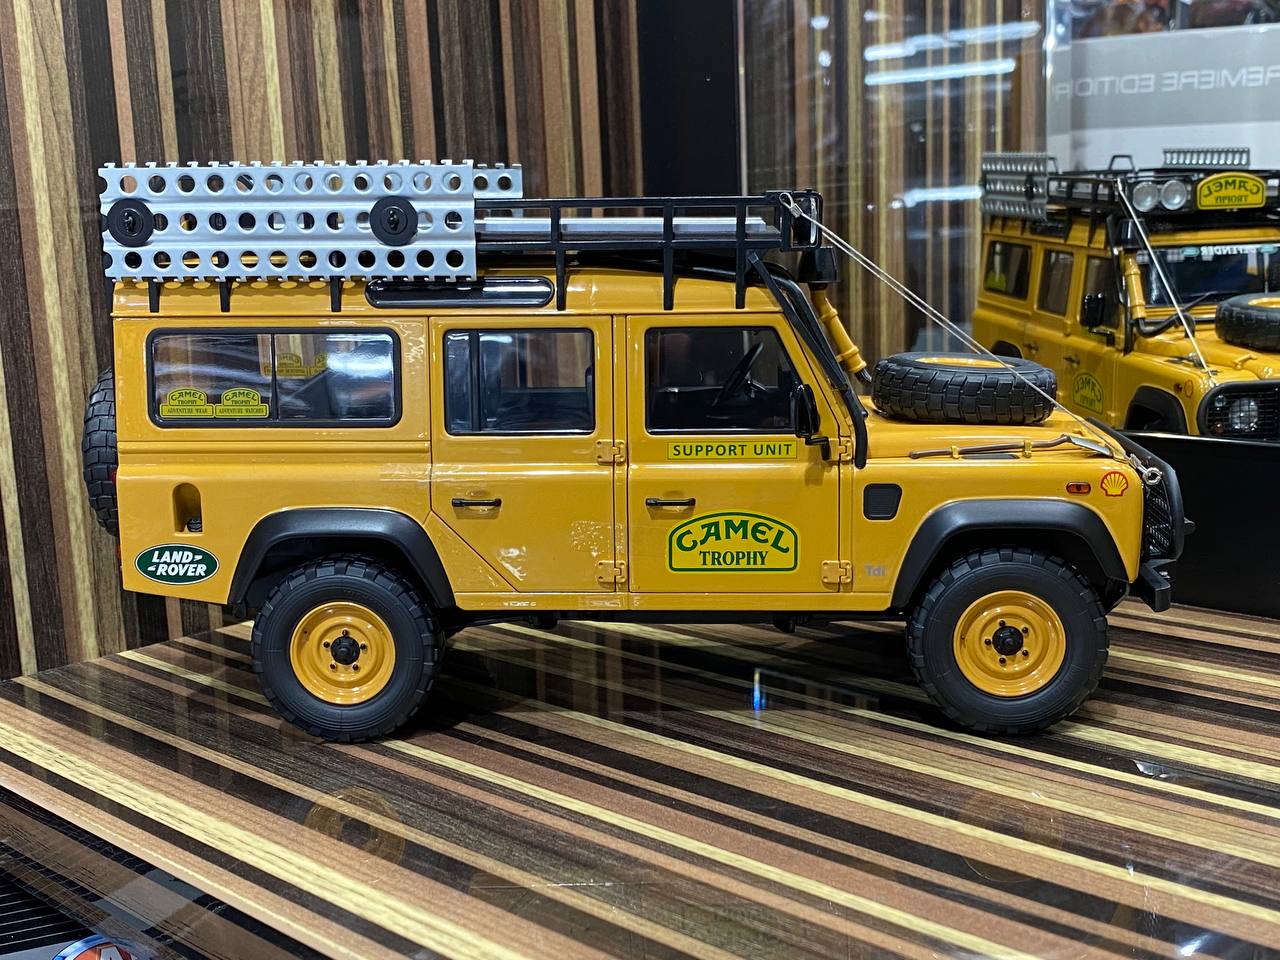 1/18 Diecast Land Rover Defender 110 "Camel Trophy Sabah-Malaysia" 1993 Almost Real Scale Model Car